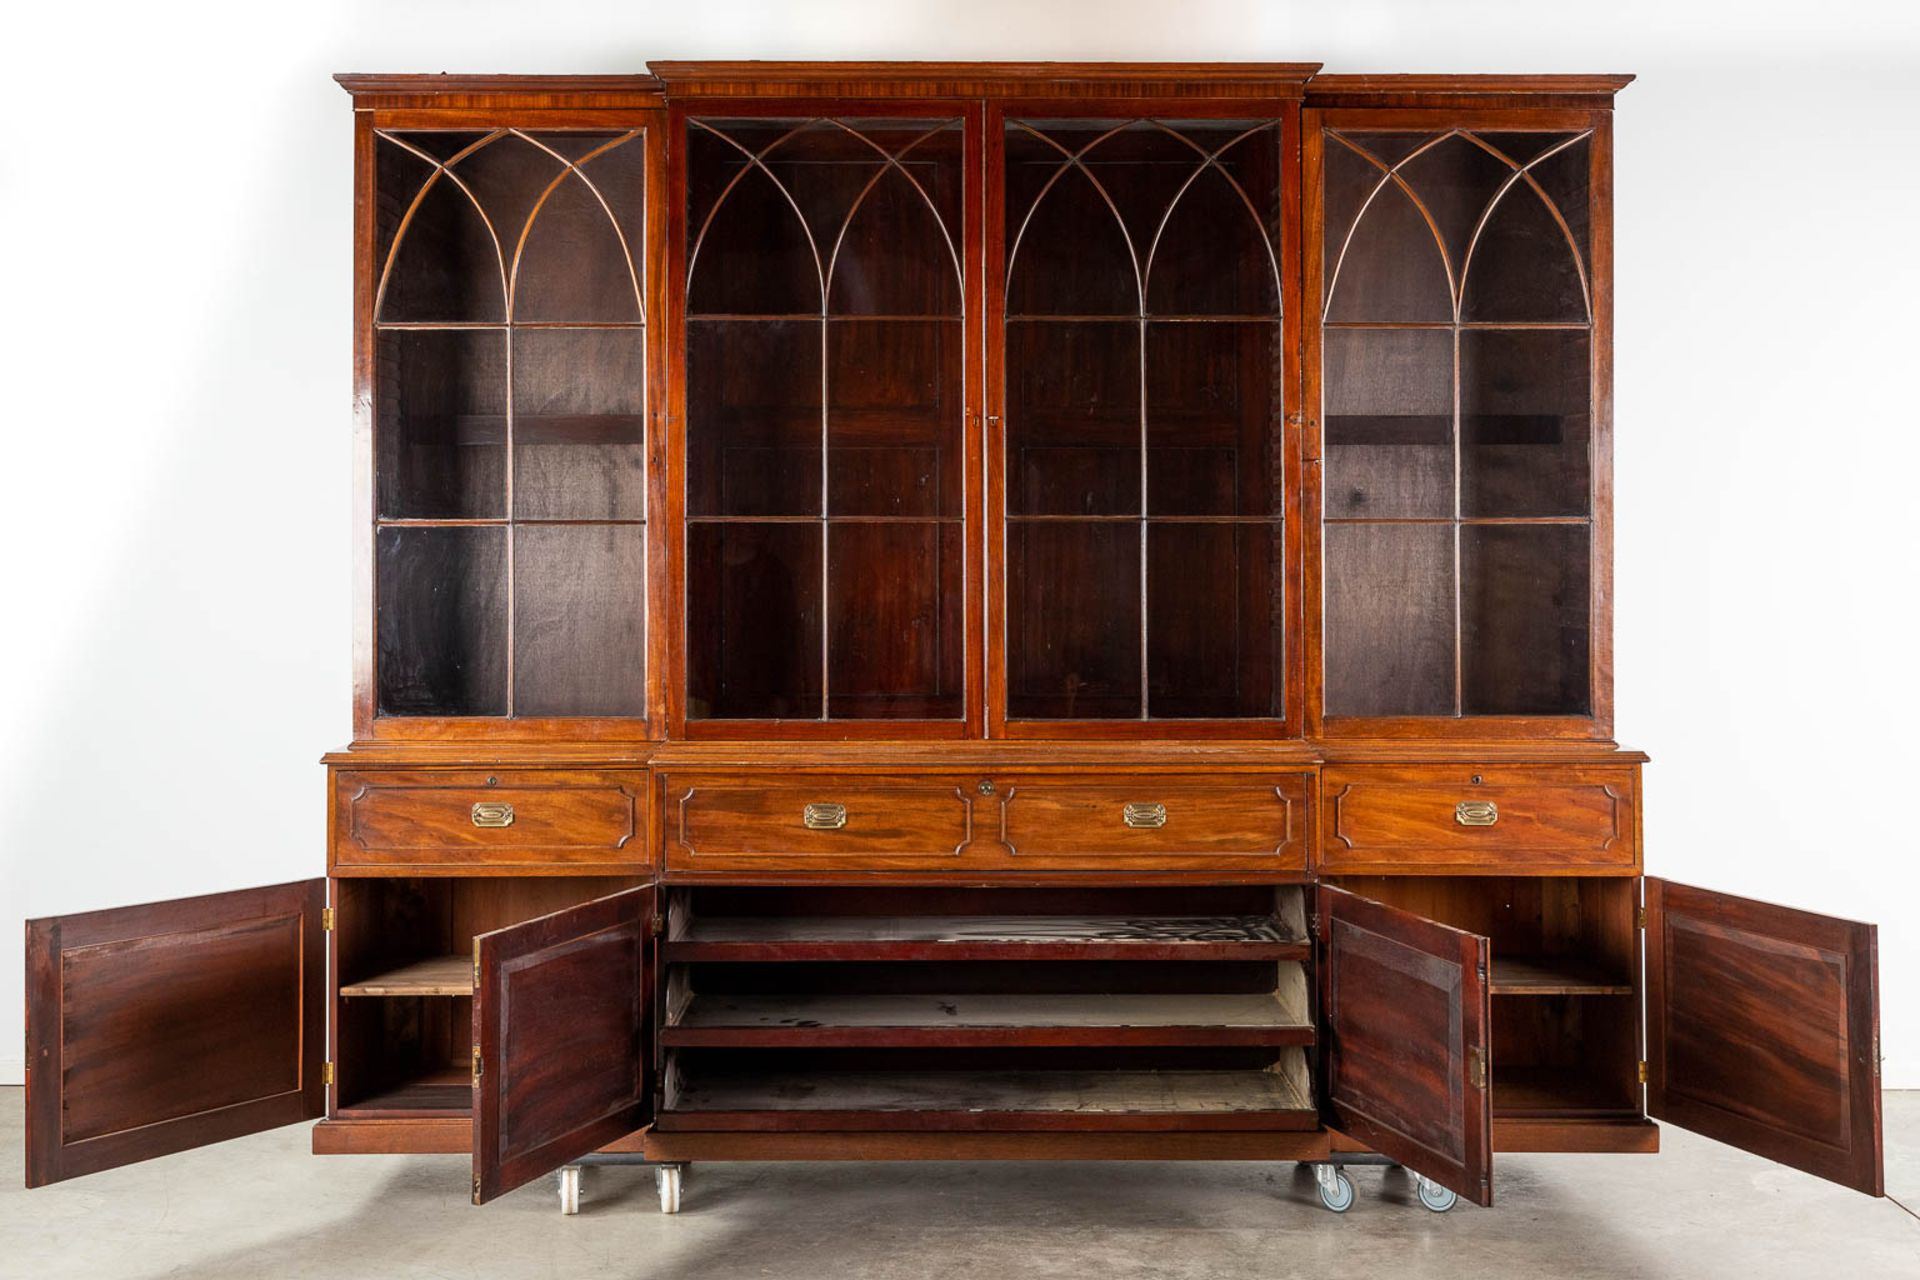 A monumental and antique English bookcase or library cabinet. 19th C. (D:63 x W:317 x H:262 cm) - Bild 4 aus 13